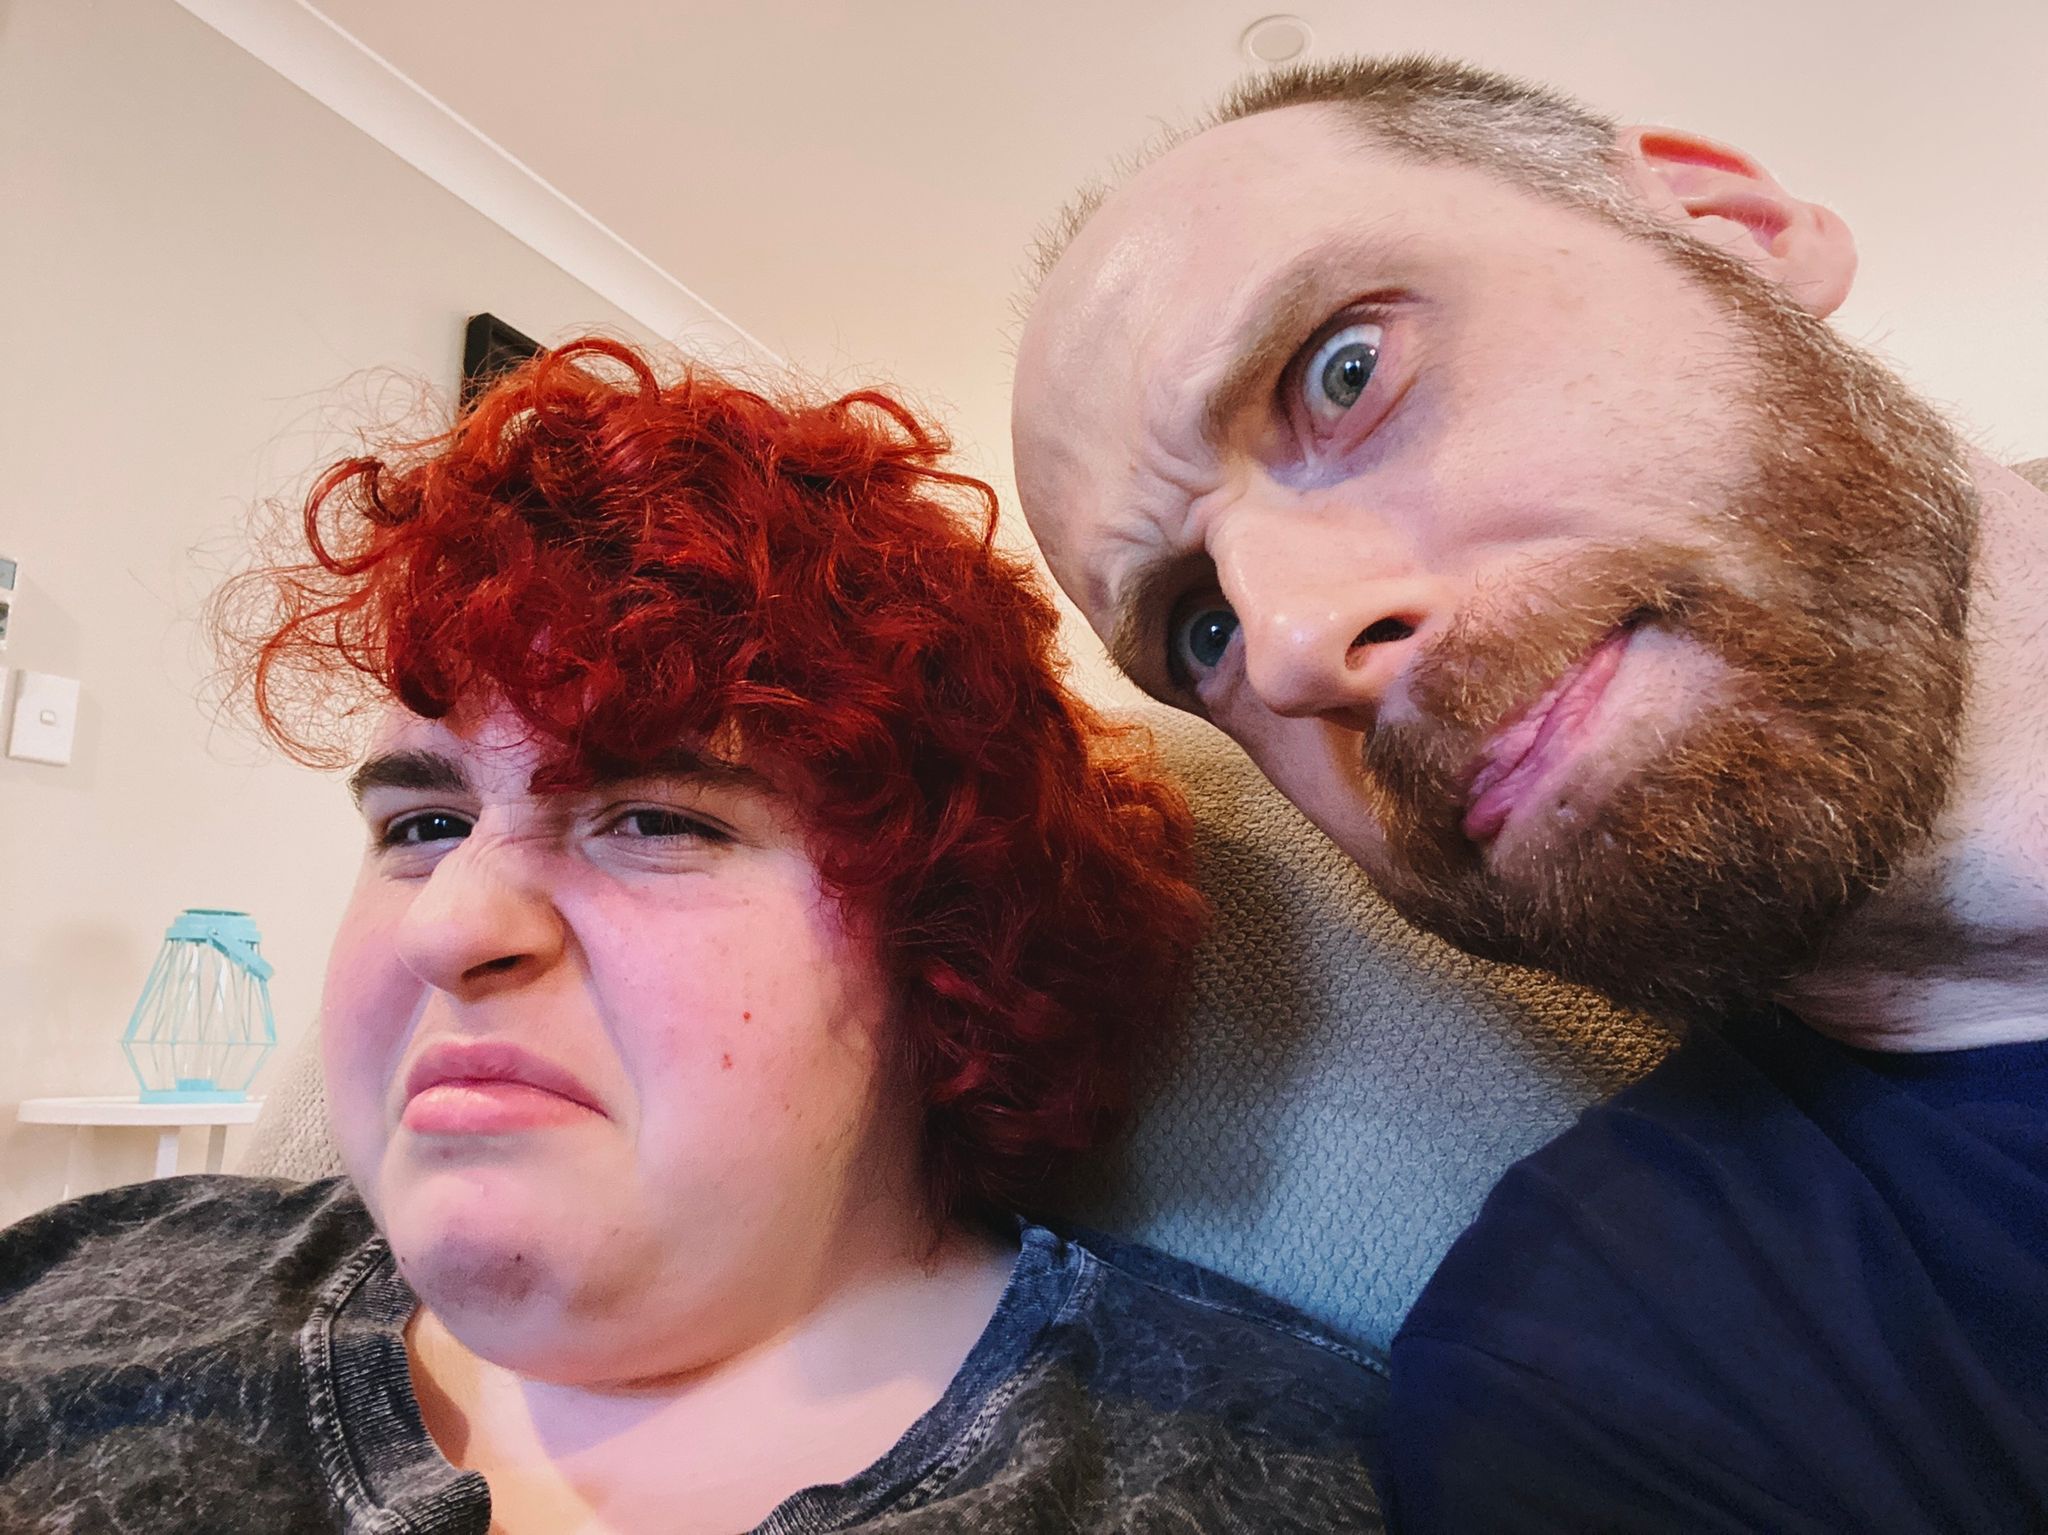 A selfie of me, a white man with a red beard and short hair, poking in from the side of frame, and Lily, a white girl with short and curly dyed-red hair and a look of mild disgust on her face.